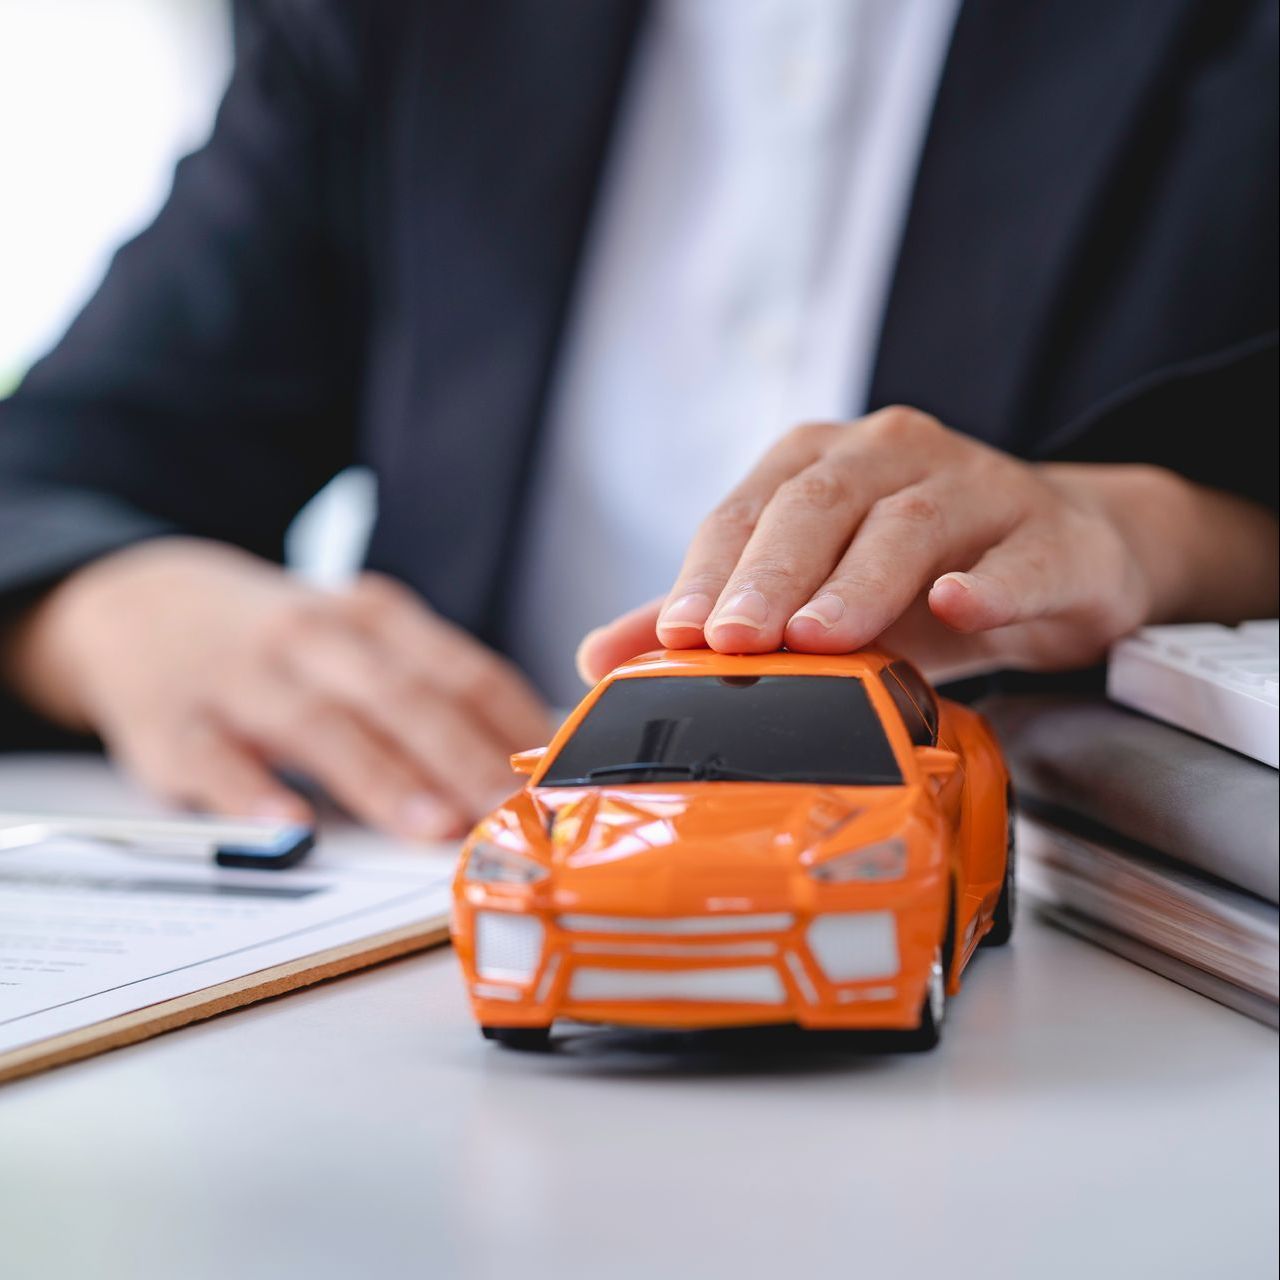 a man is holding an orange toy car in front of a clipboard